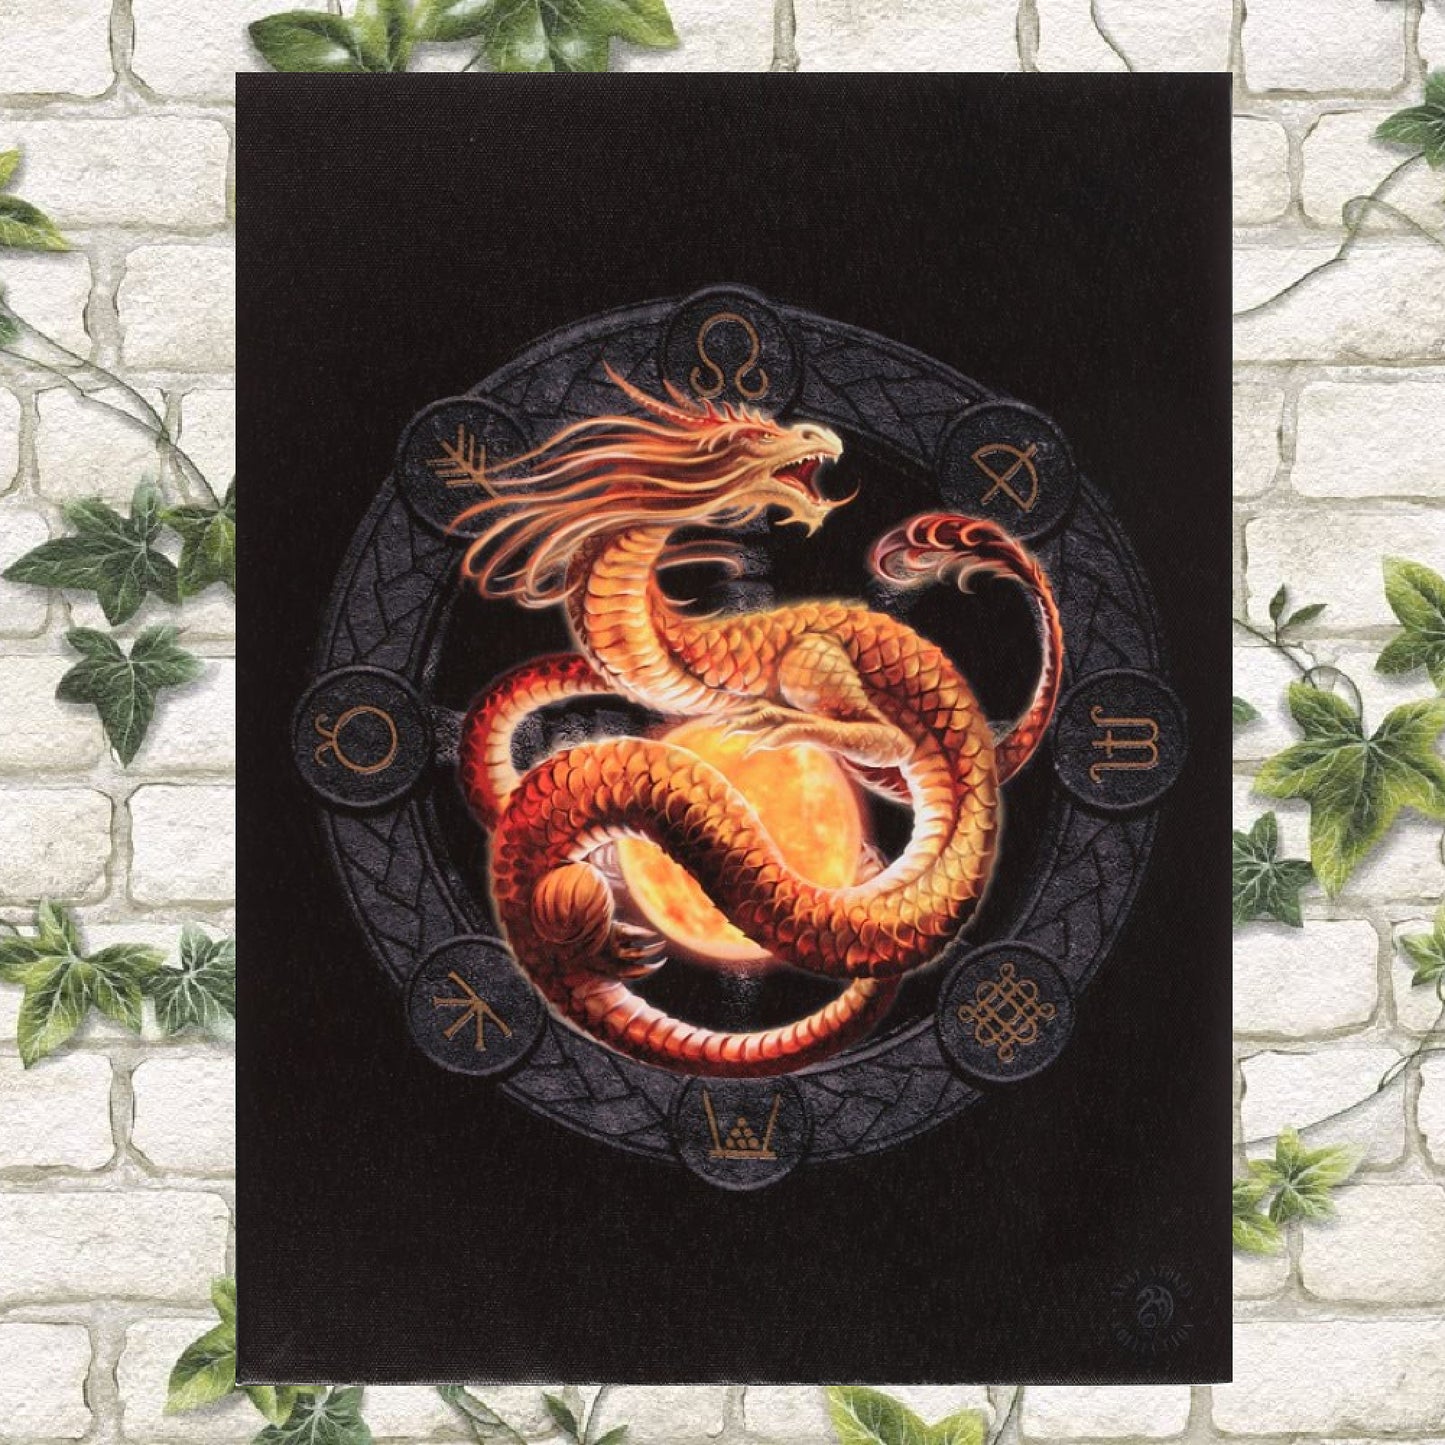 25cm x 19cm canvas wall plaque featuring a high quality, full colour print of the Litha dragon artwork by fantasy artist Anne Stokes. Part of the Dragons of the Sabbats art series